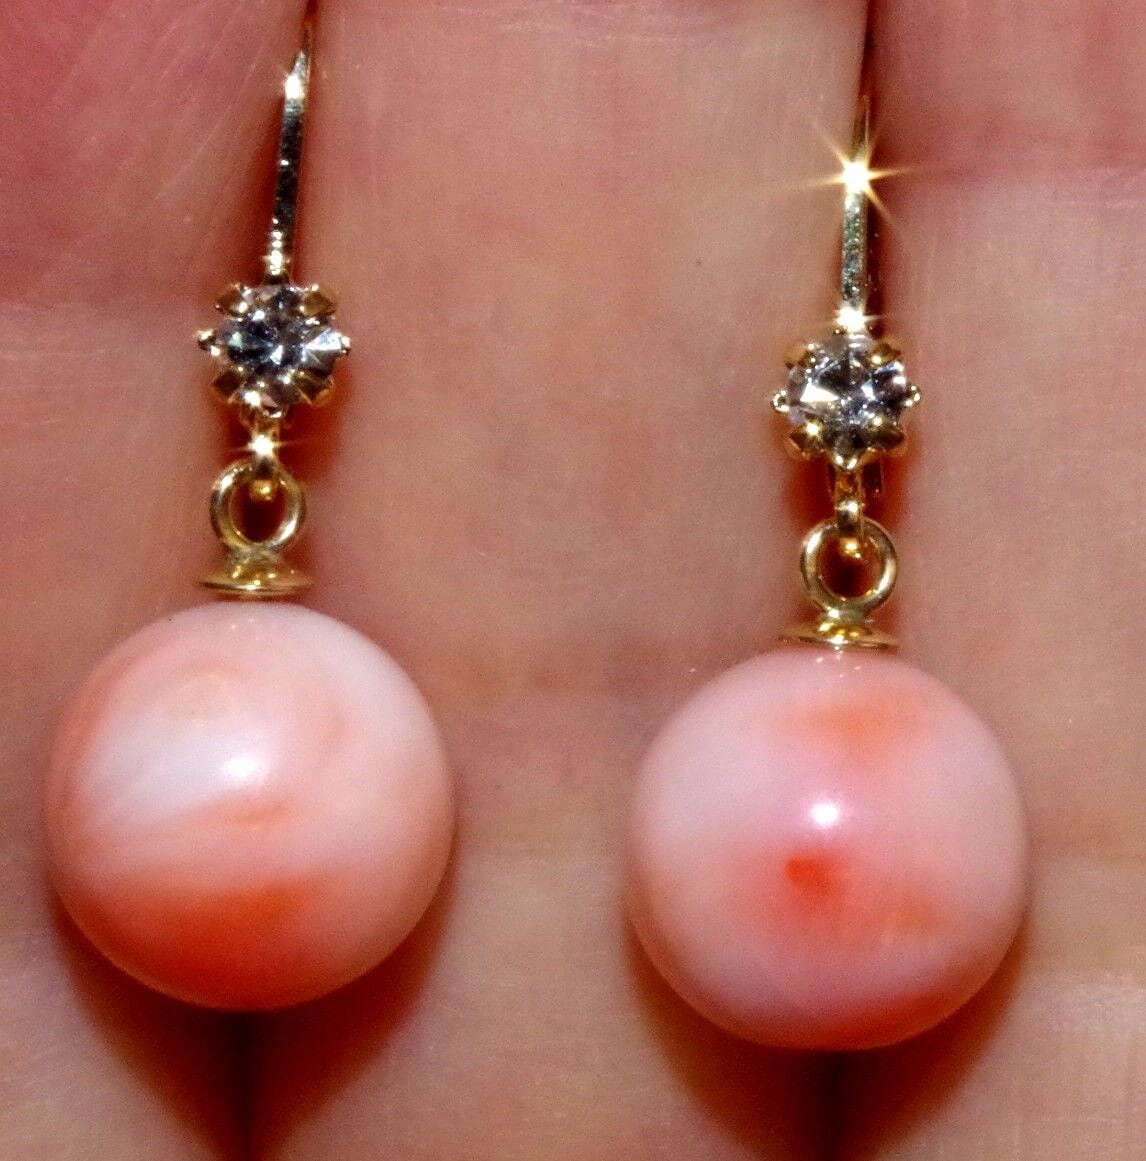 Details about   ANGEL SKIN CORAL DROP 11MM BALL ANTIQUE GORGEOUS 14K GOLD FILL EARRINGS W CZ AA 